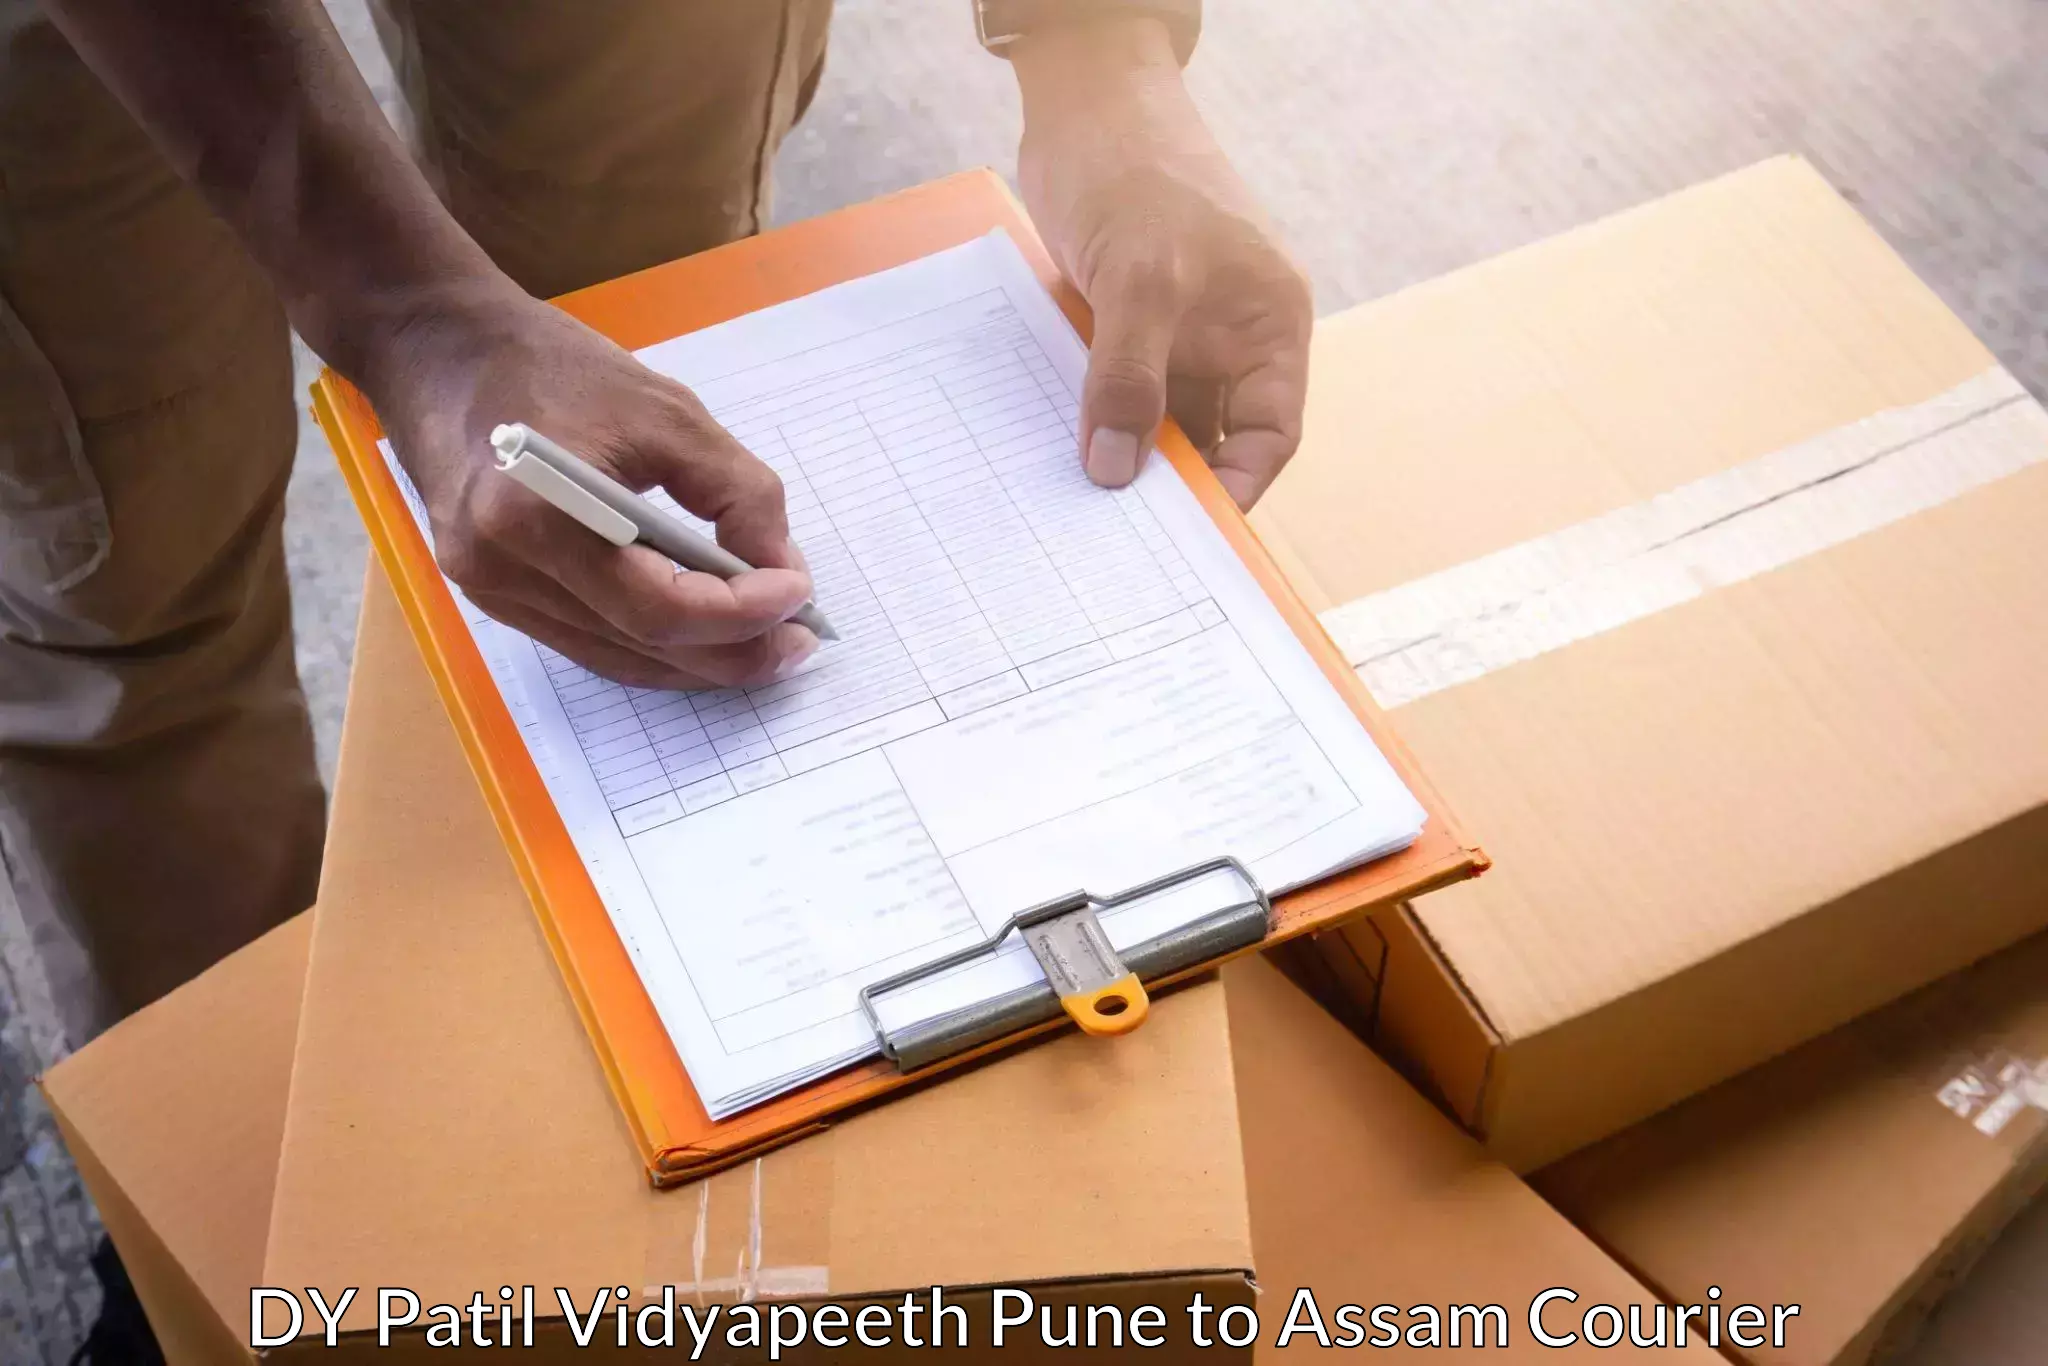 Express courier capabilities DY Patil Vidyapeeth Pune to Amoni